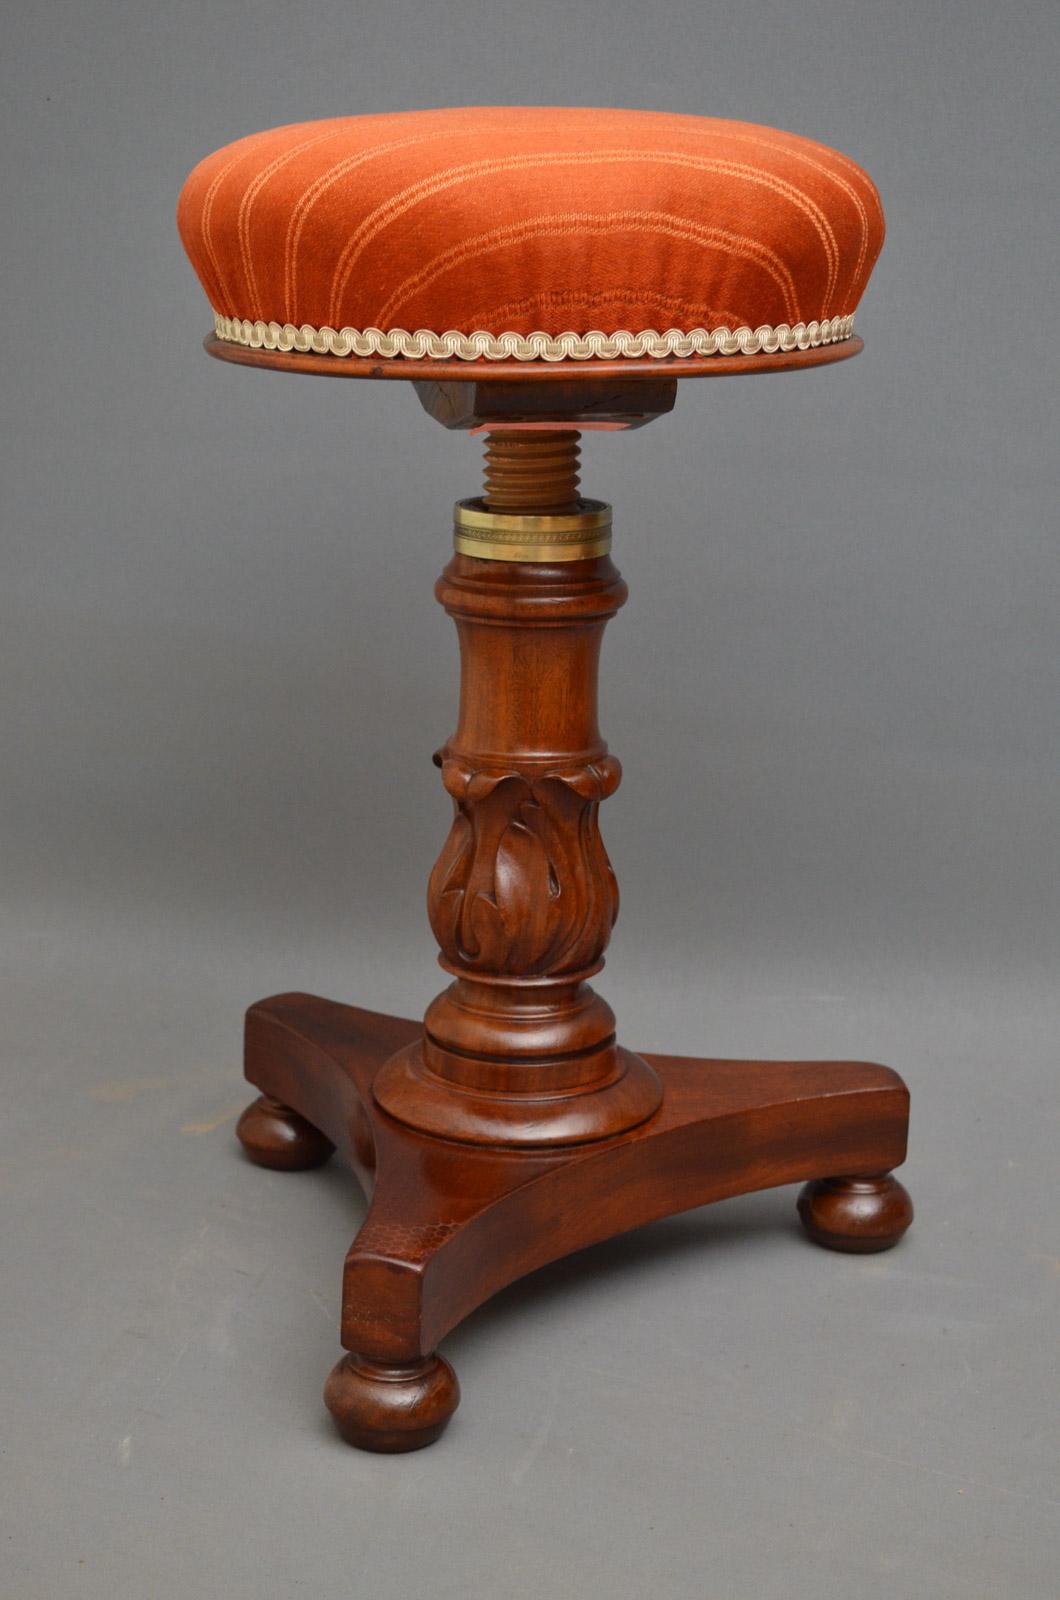 Sn3366 fine quality and very robust William IV, mahogany, height adjustable dressing table stool, having red cover seat on lotus carved column terminating in trefoil base and bun feet, all in fantastic condition throughout, circa 1830
Height